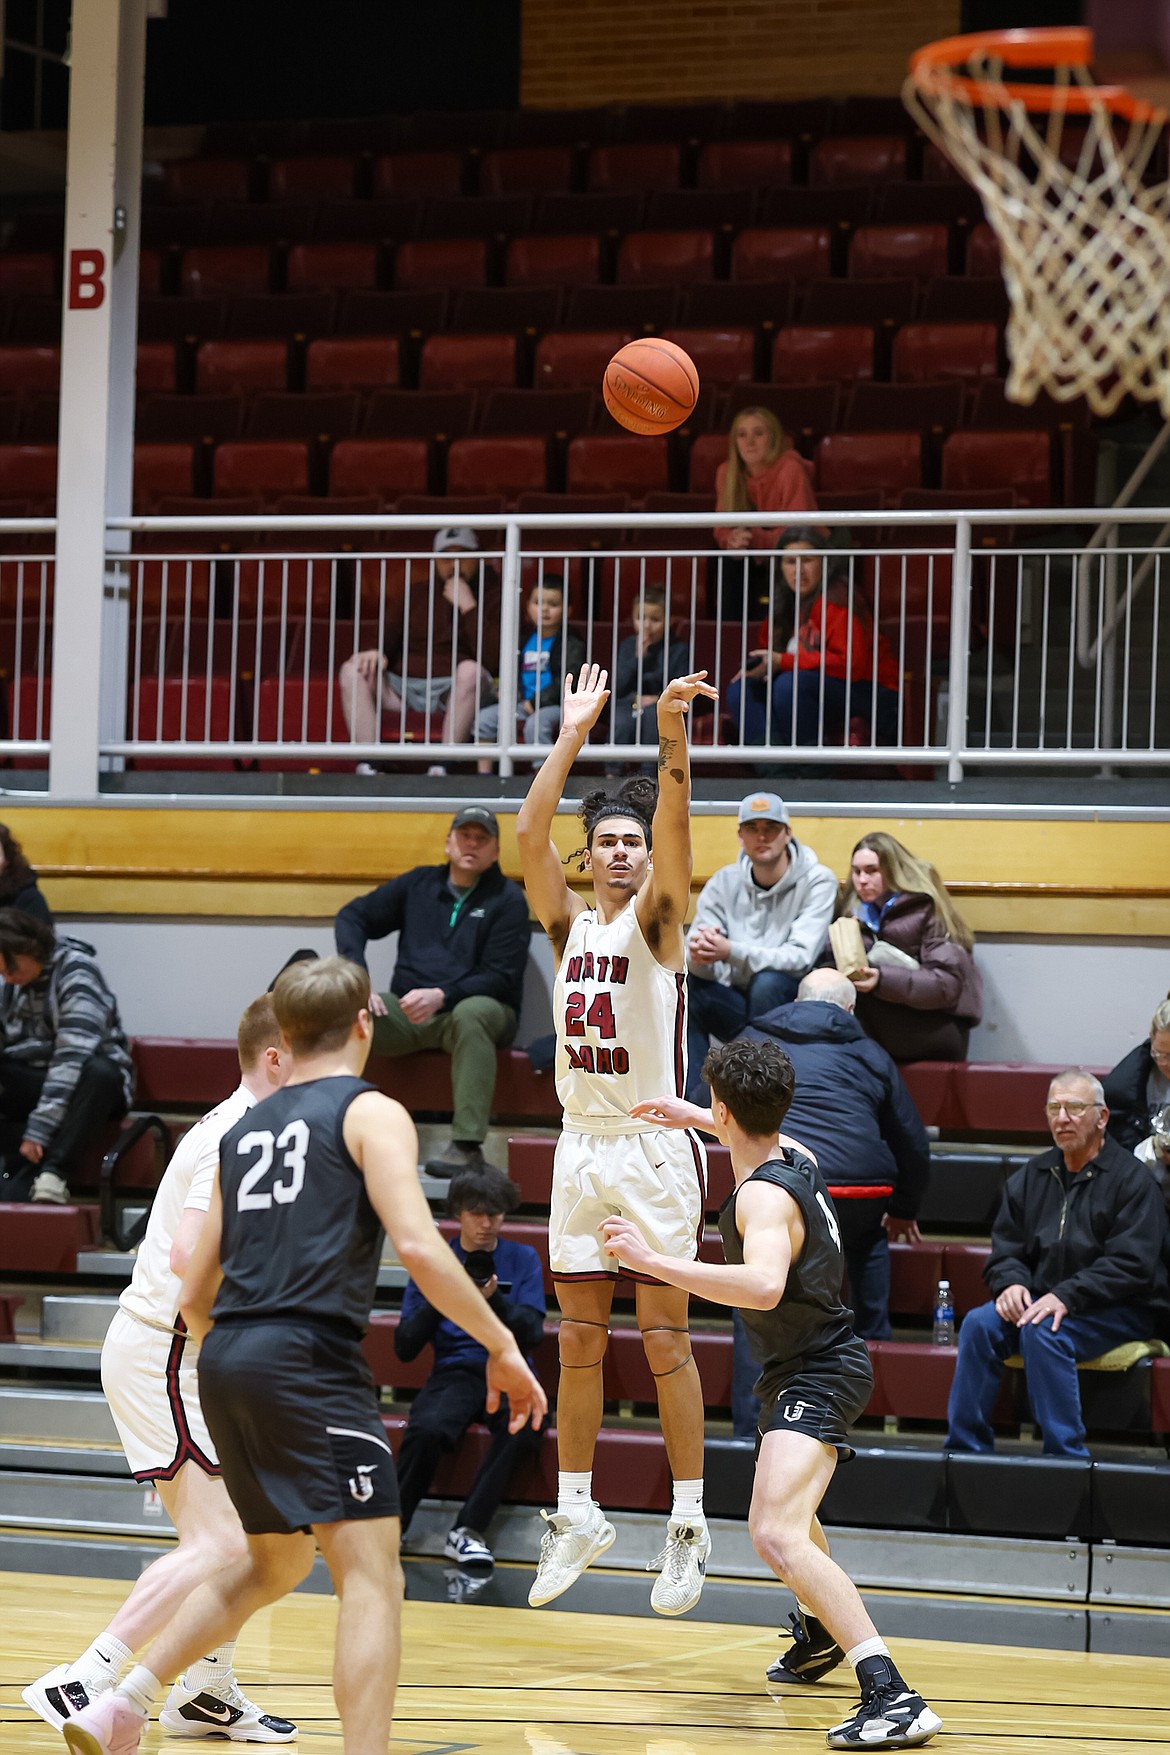 KYLE DISHAW PHOTOGRAPHY
Jalen Skalskiy, a redshirt sophomore from Lakeland High, puts up a 3-pointer during Tuesday's game against Wenatchee Valley.